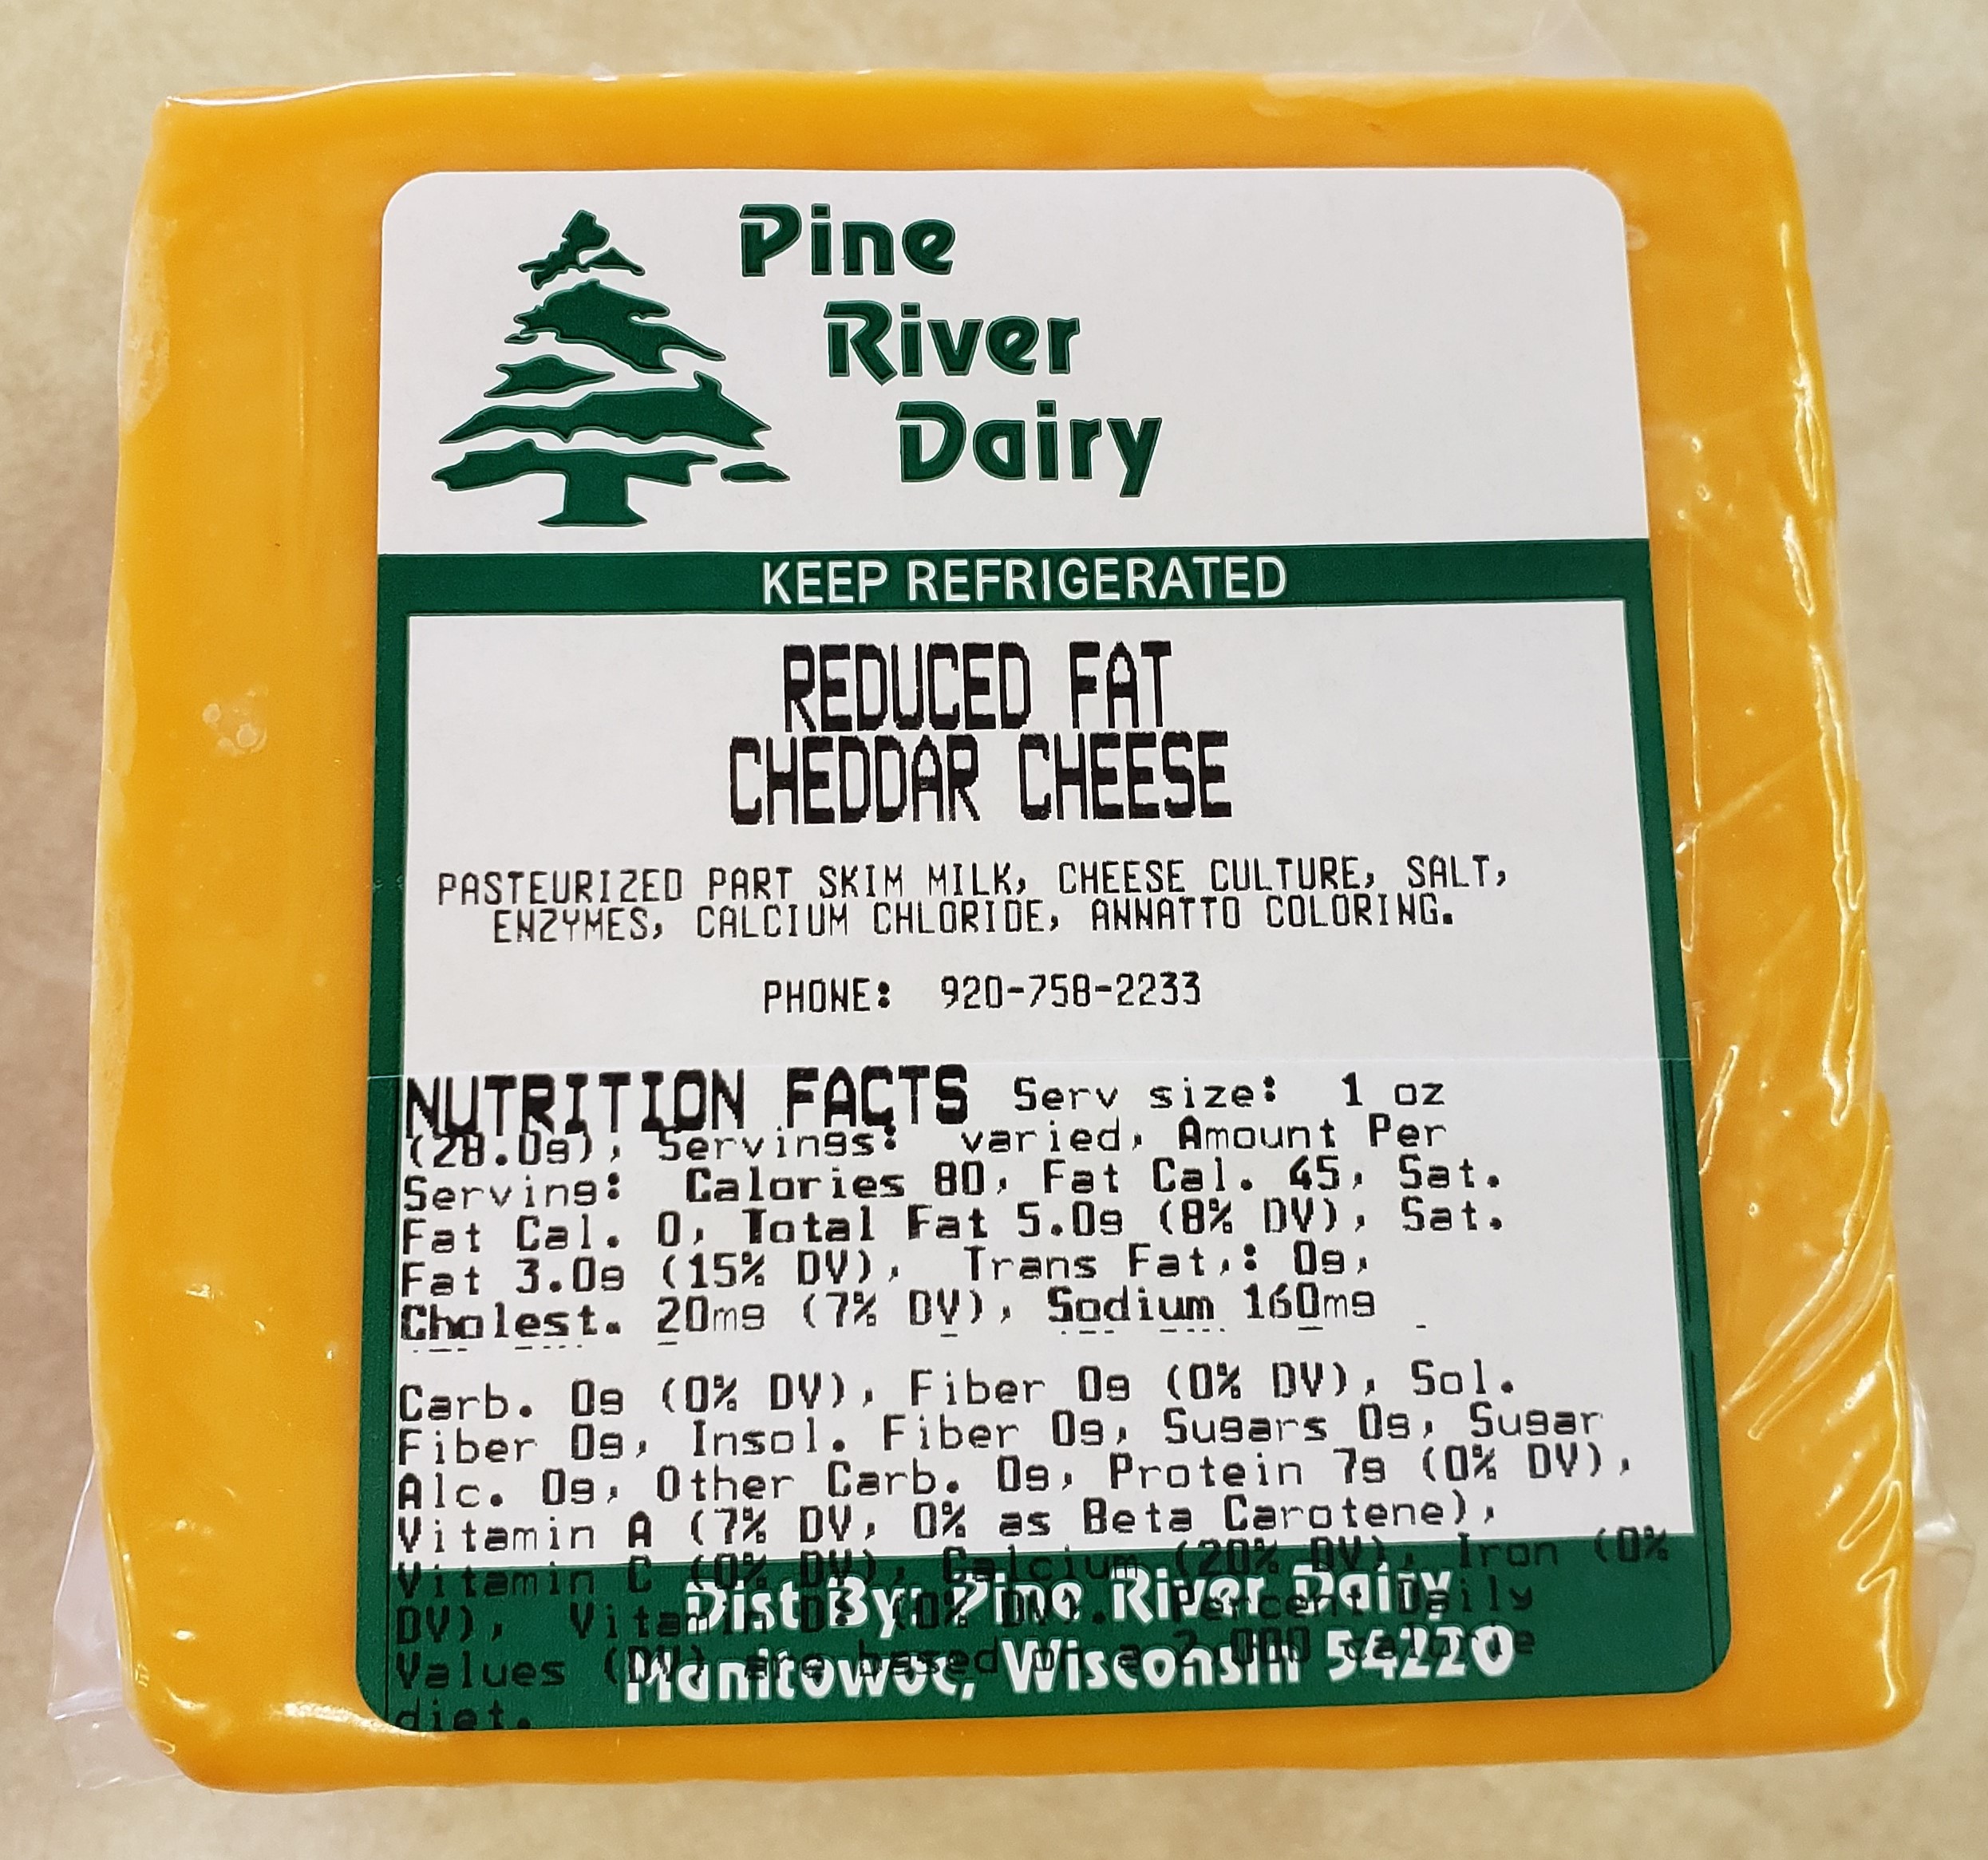 Reduced Fat Cheddar Cheese